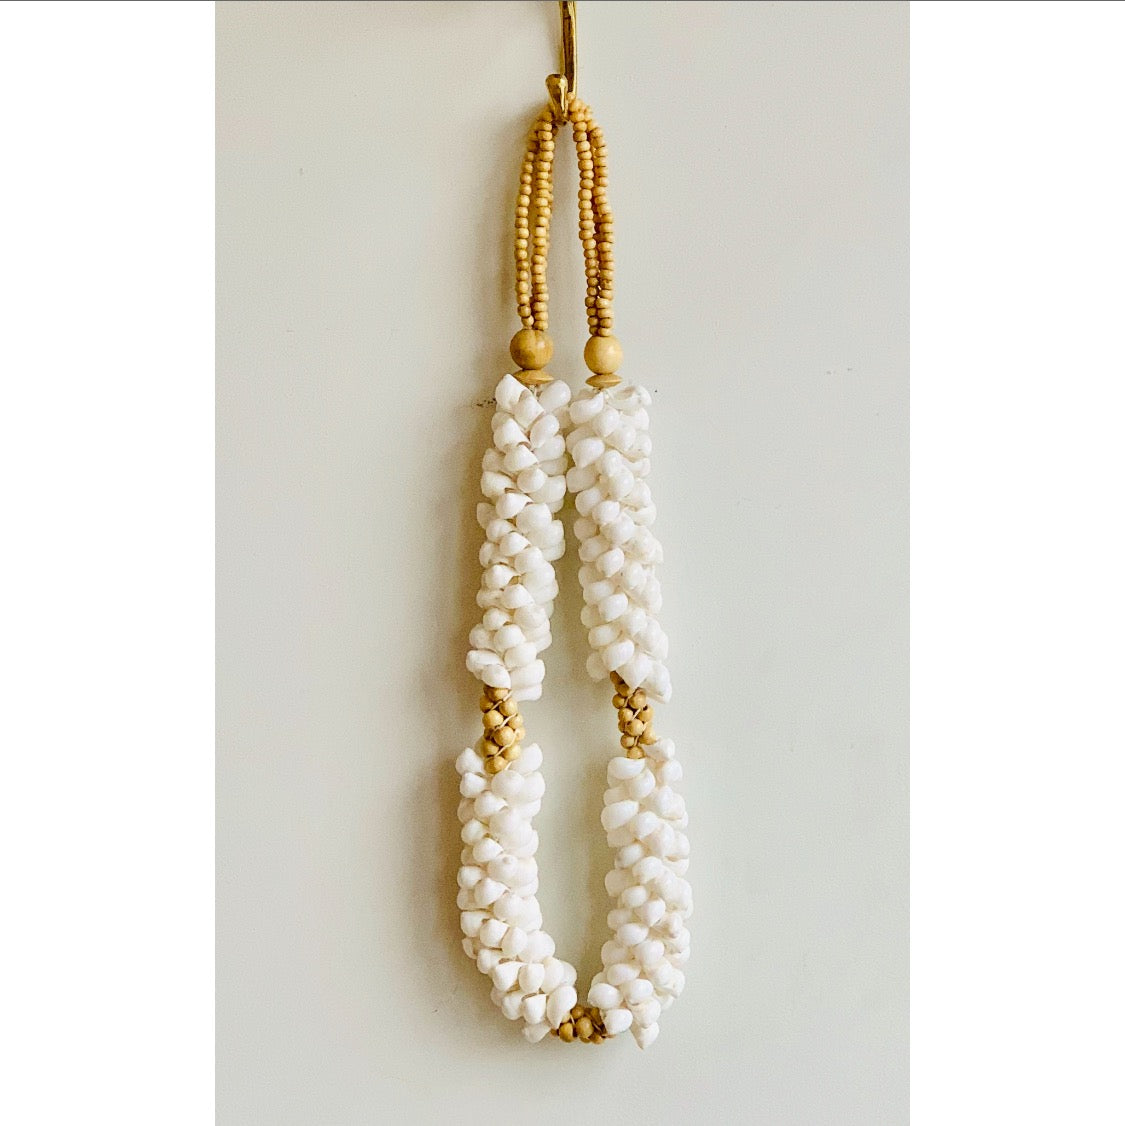 Shell necklace with beads – Katamama